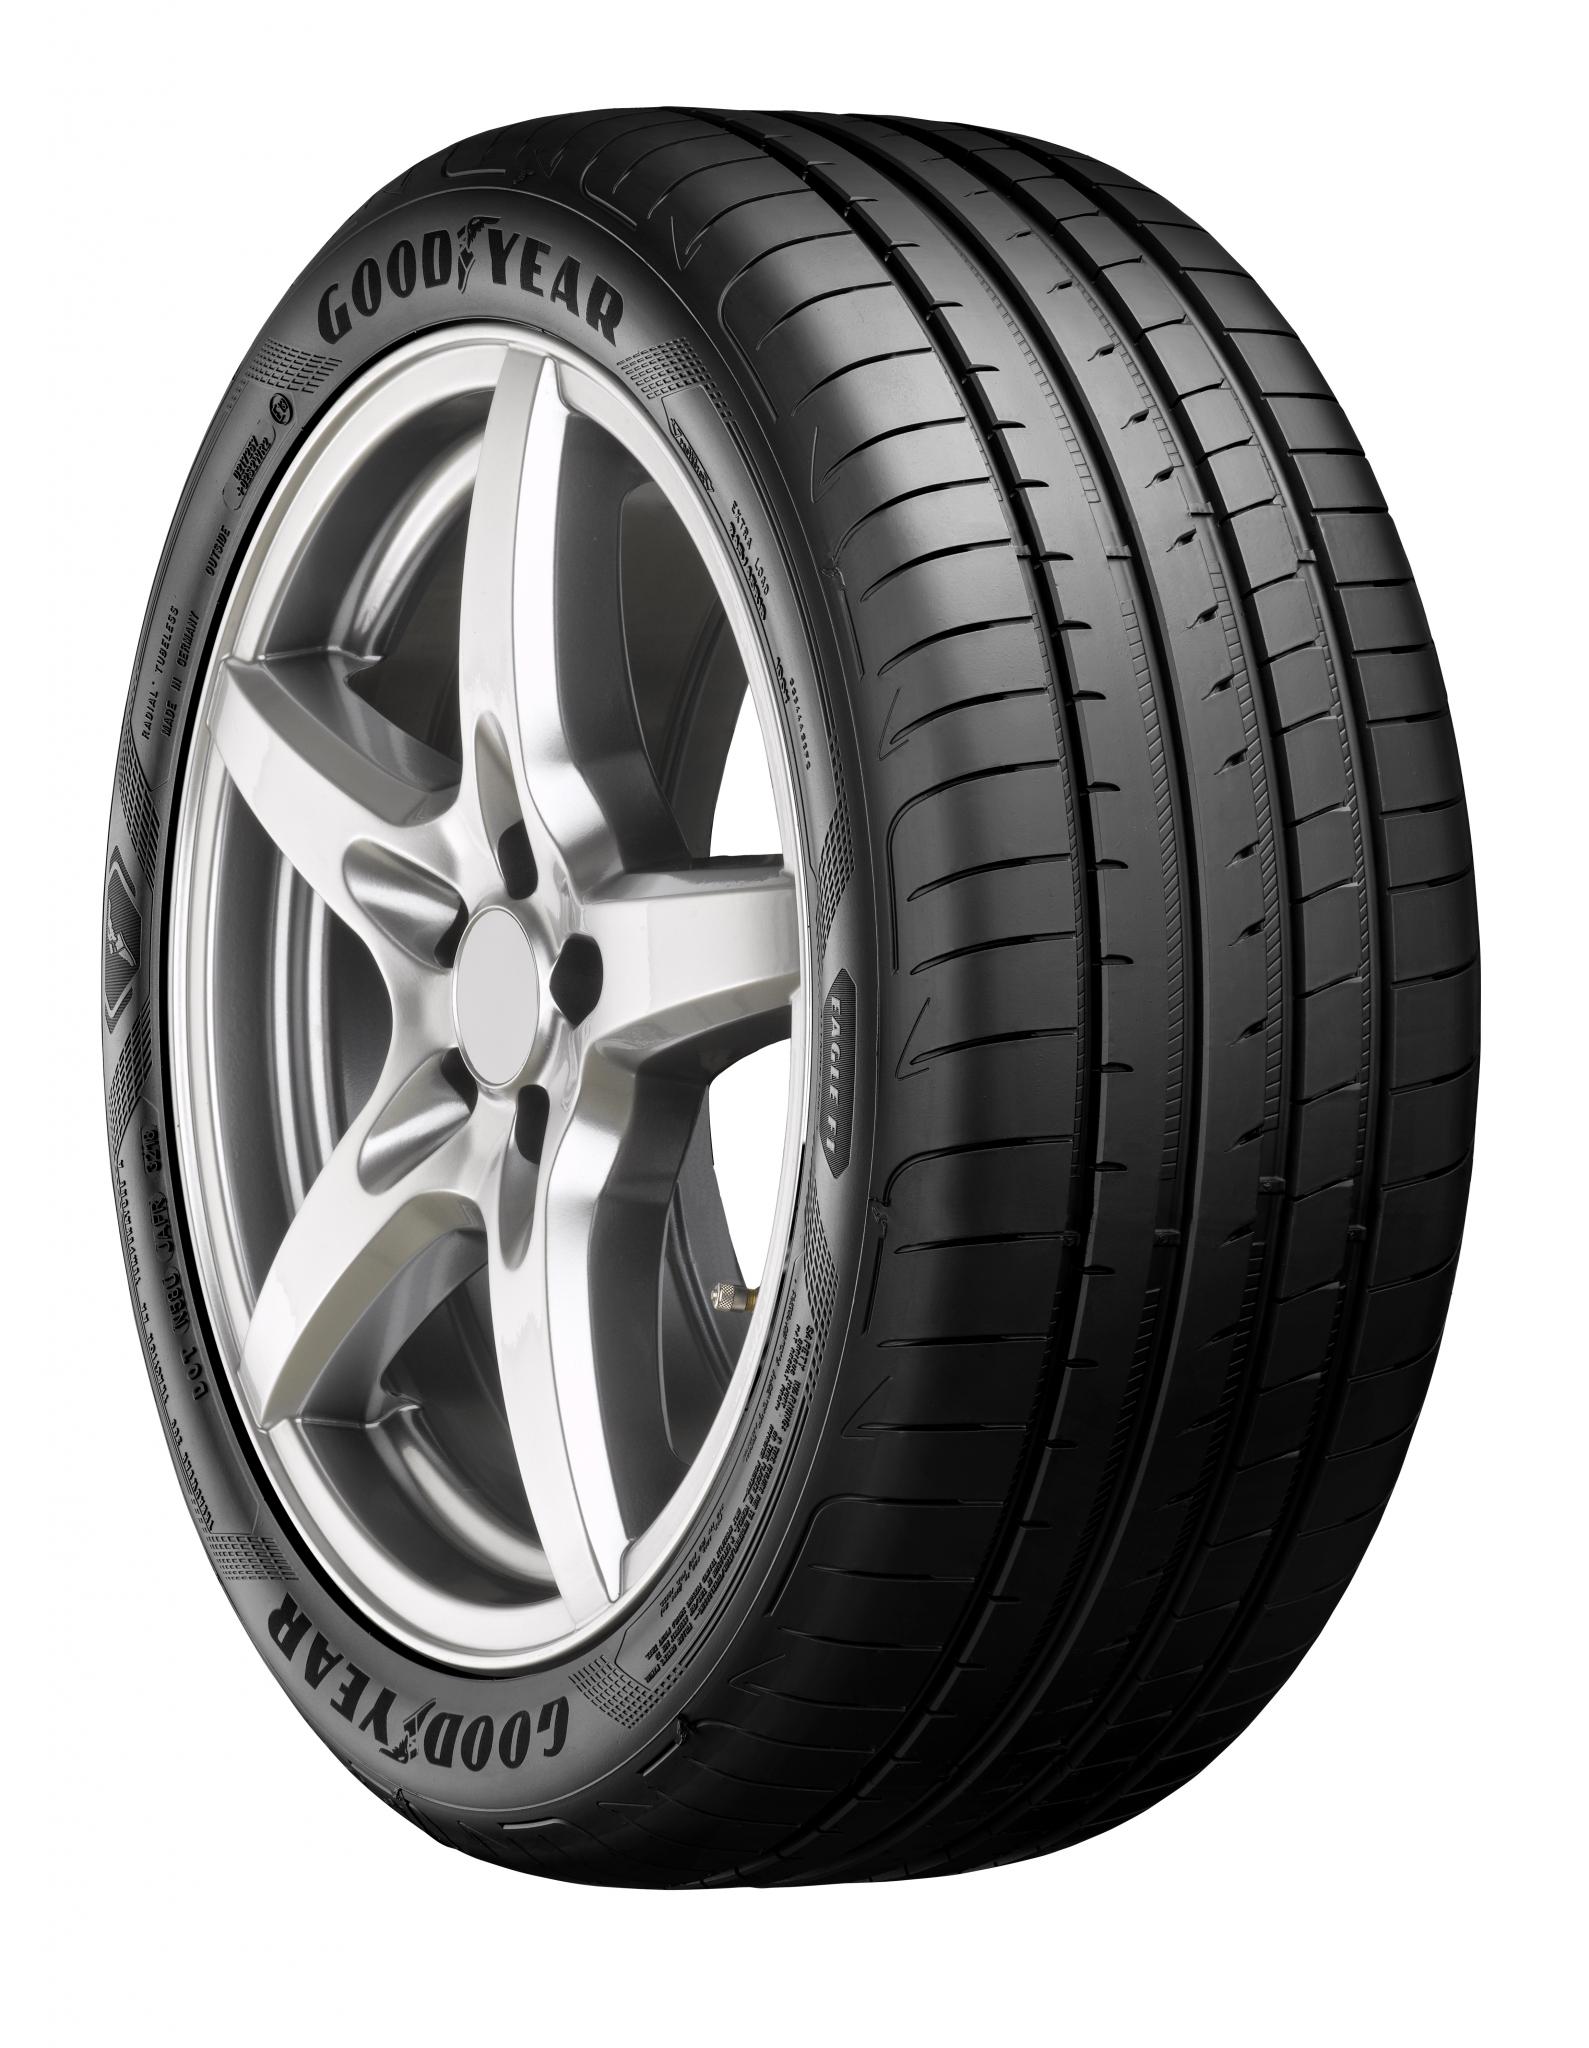 Goodyear Eagle F1 Asymmetric 5 - Tire Reviews and Tests